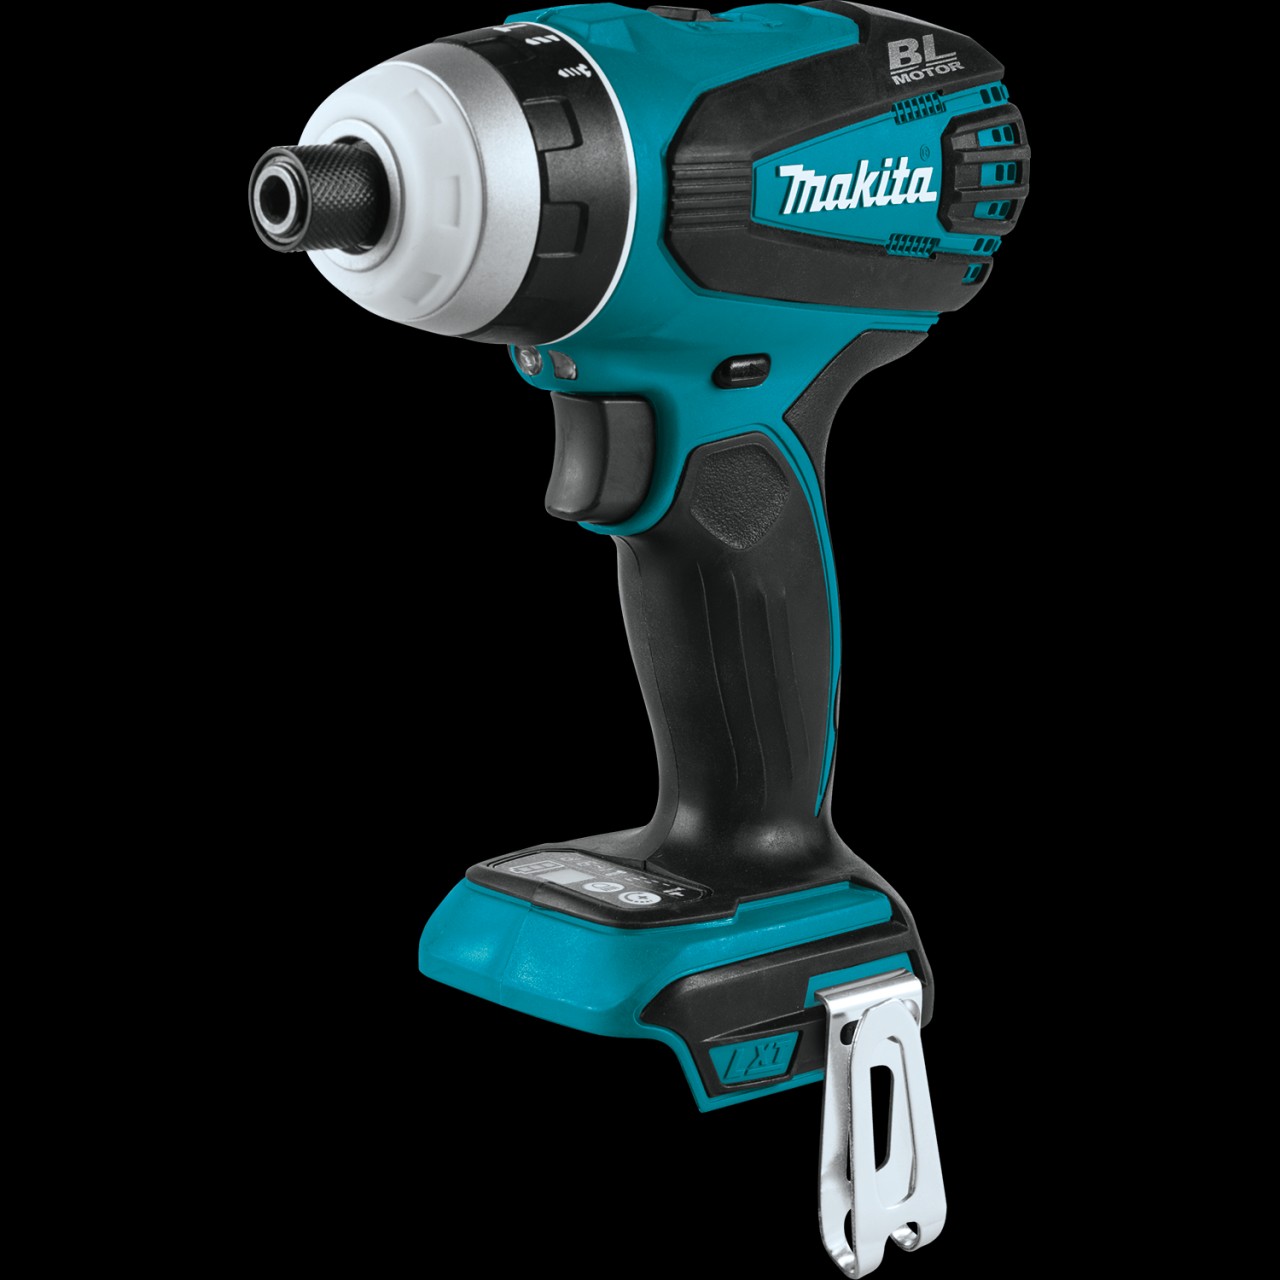 Makita USA - Product Details -XPT02Z